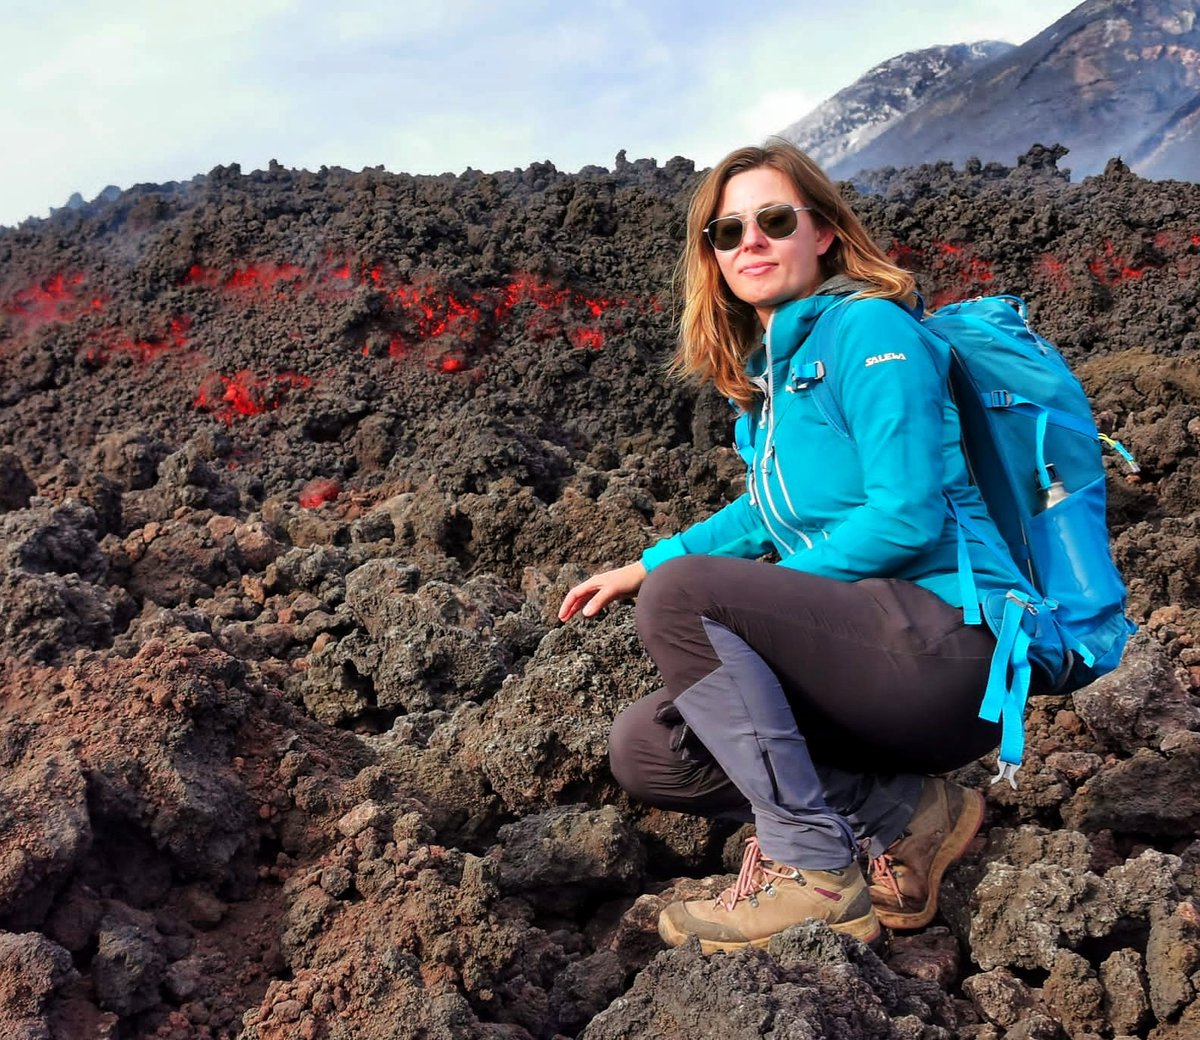 What a day! I will remember it for a long time. #Etna ❤️
📷 by @trailsofsicily
📅 14 December 2020
🇬🇧 trailsofsicily.com
🇵🇱 szlakamisycylii.pl 
#️⃣ #trailsofsicily
#️⃣ #szlakamisycylli

#eruzione #catania #hikingadventures